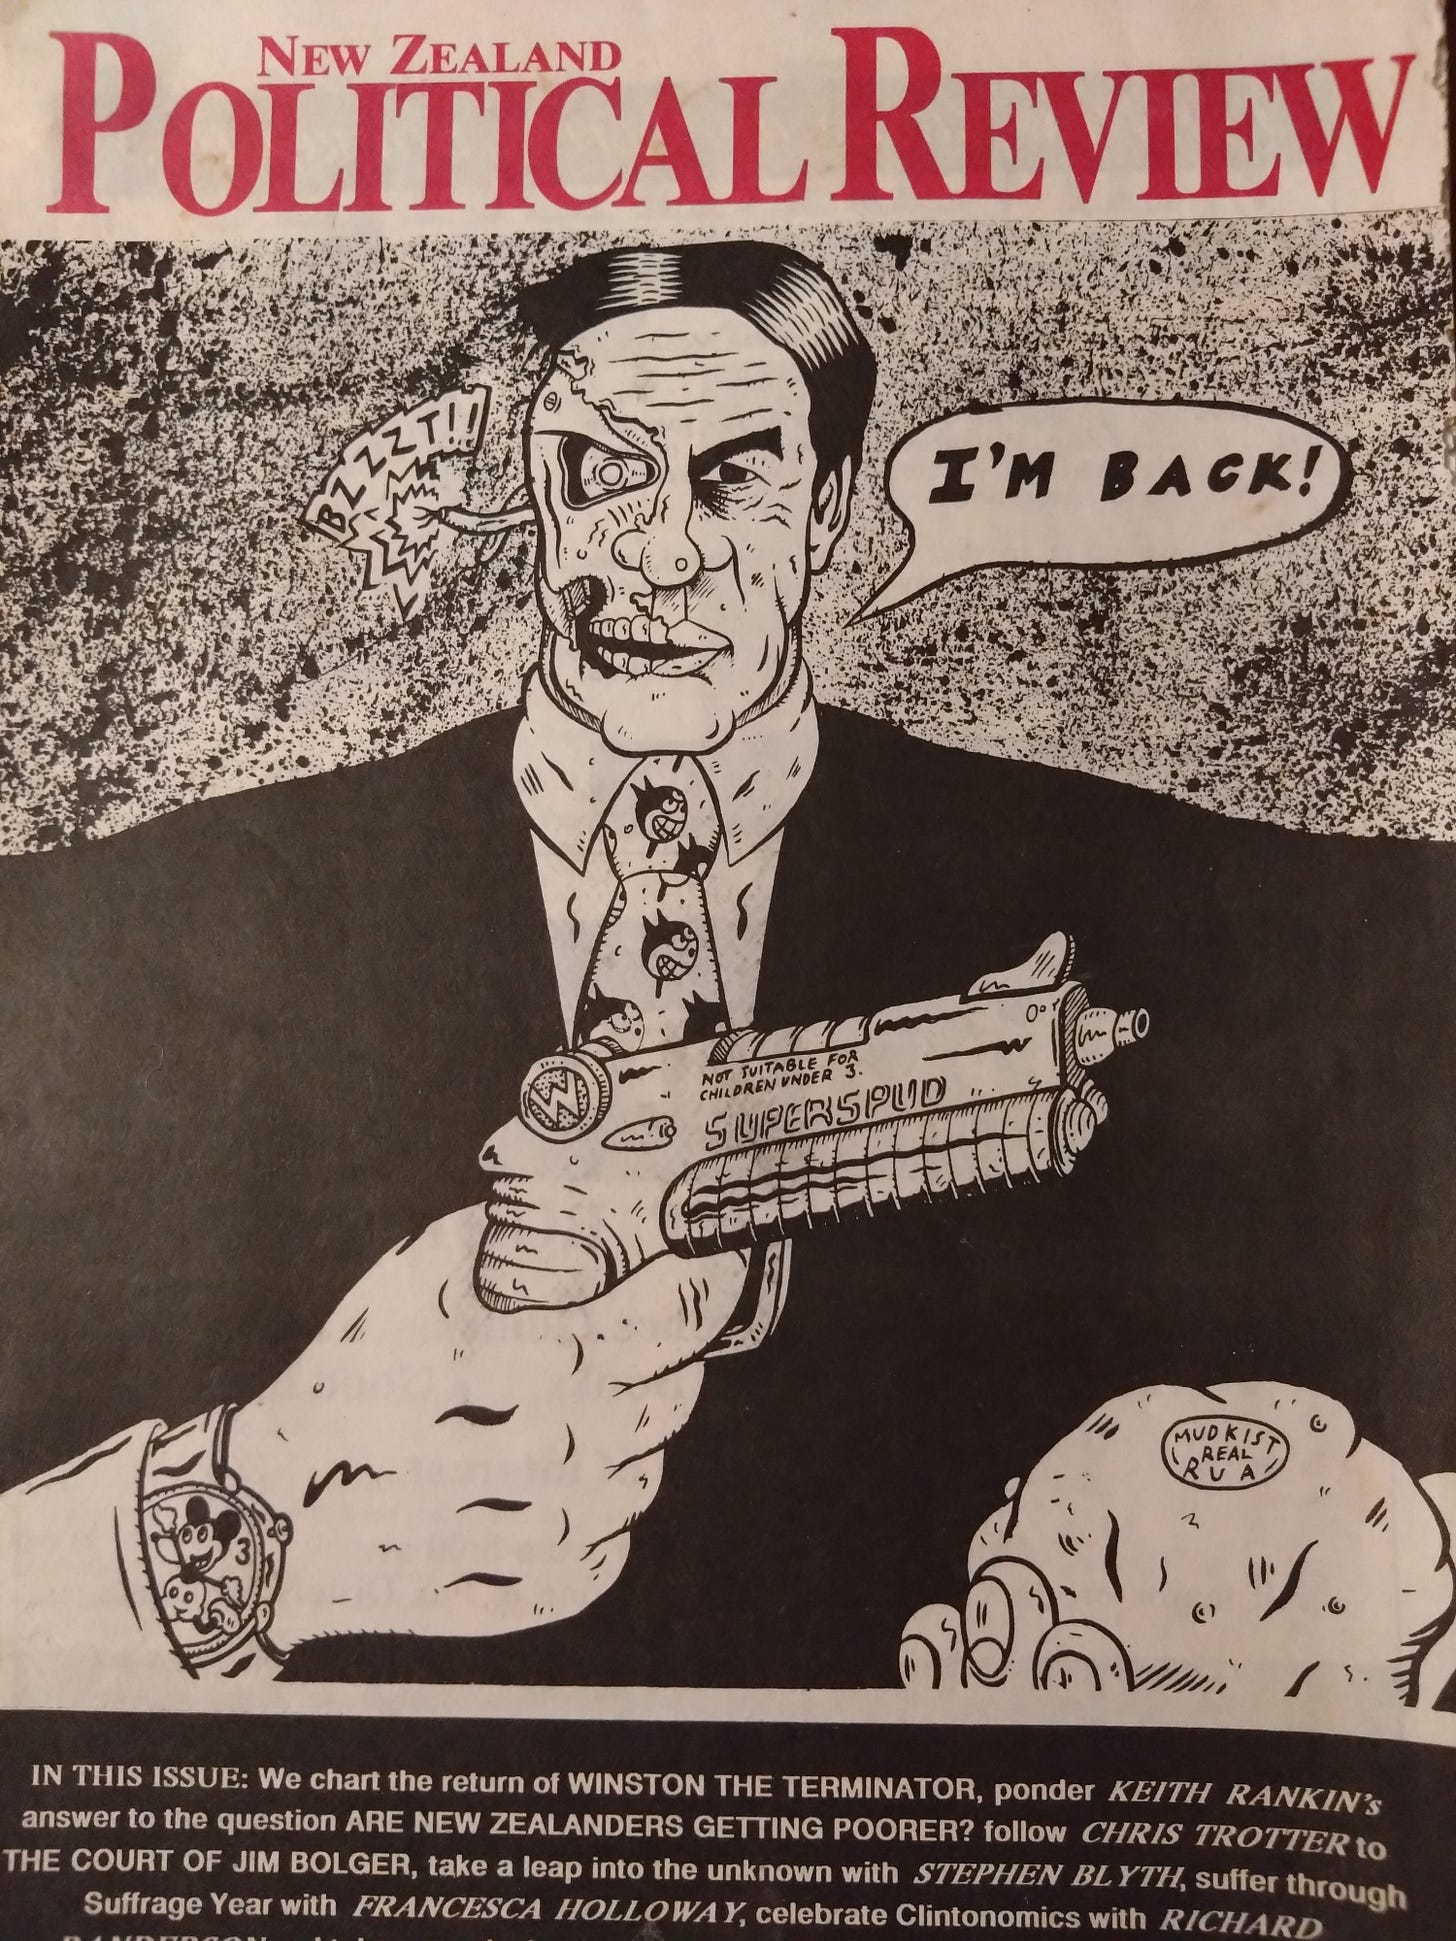 NZ Political Review cover, May/ June 1993 edition, with a scary cartoon picture of Winston Peter's saying "I'm back!"of 